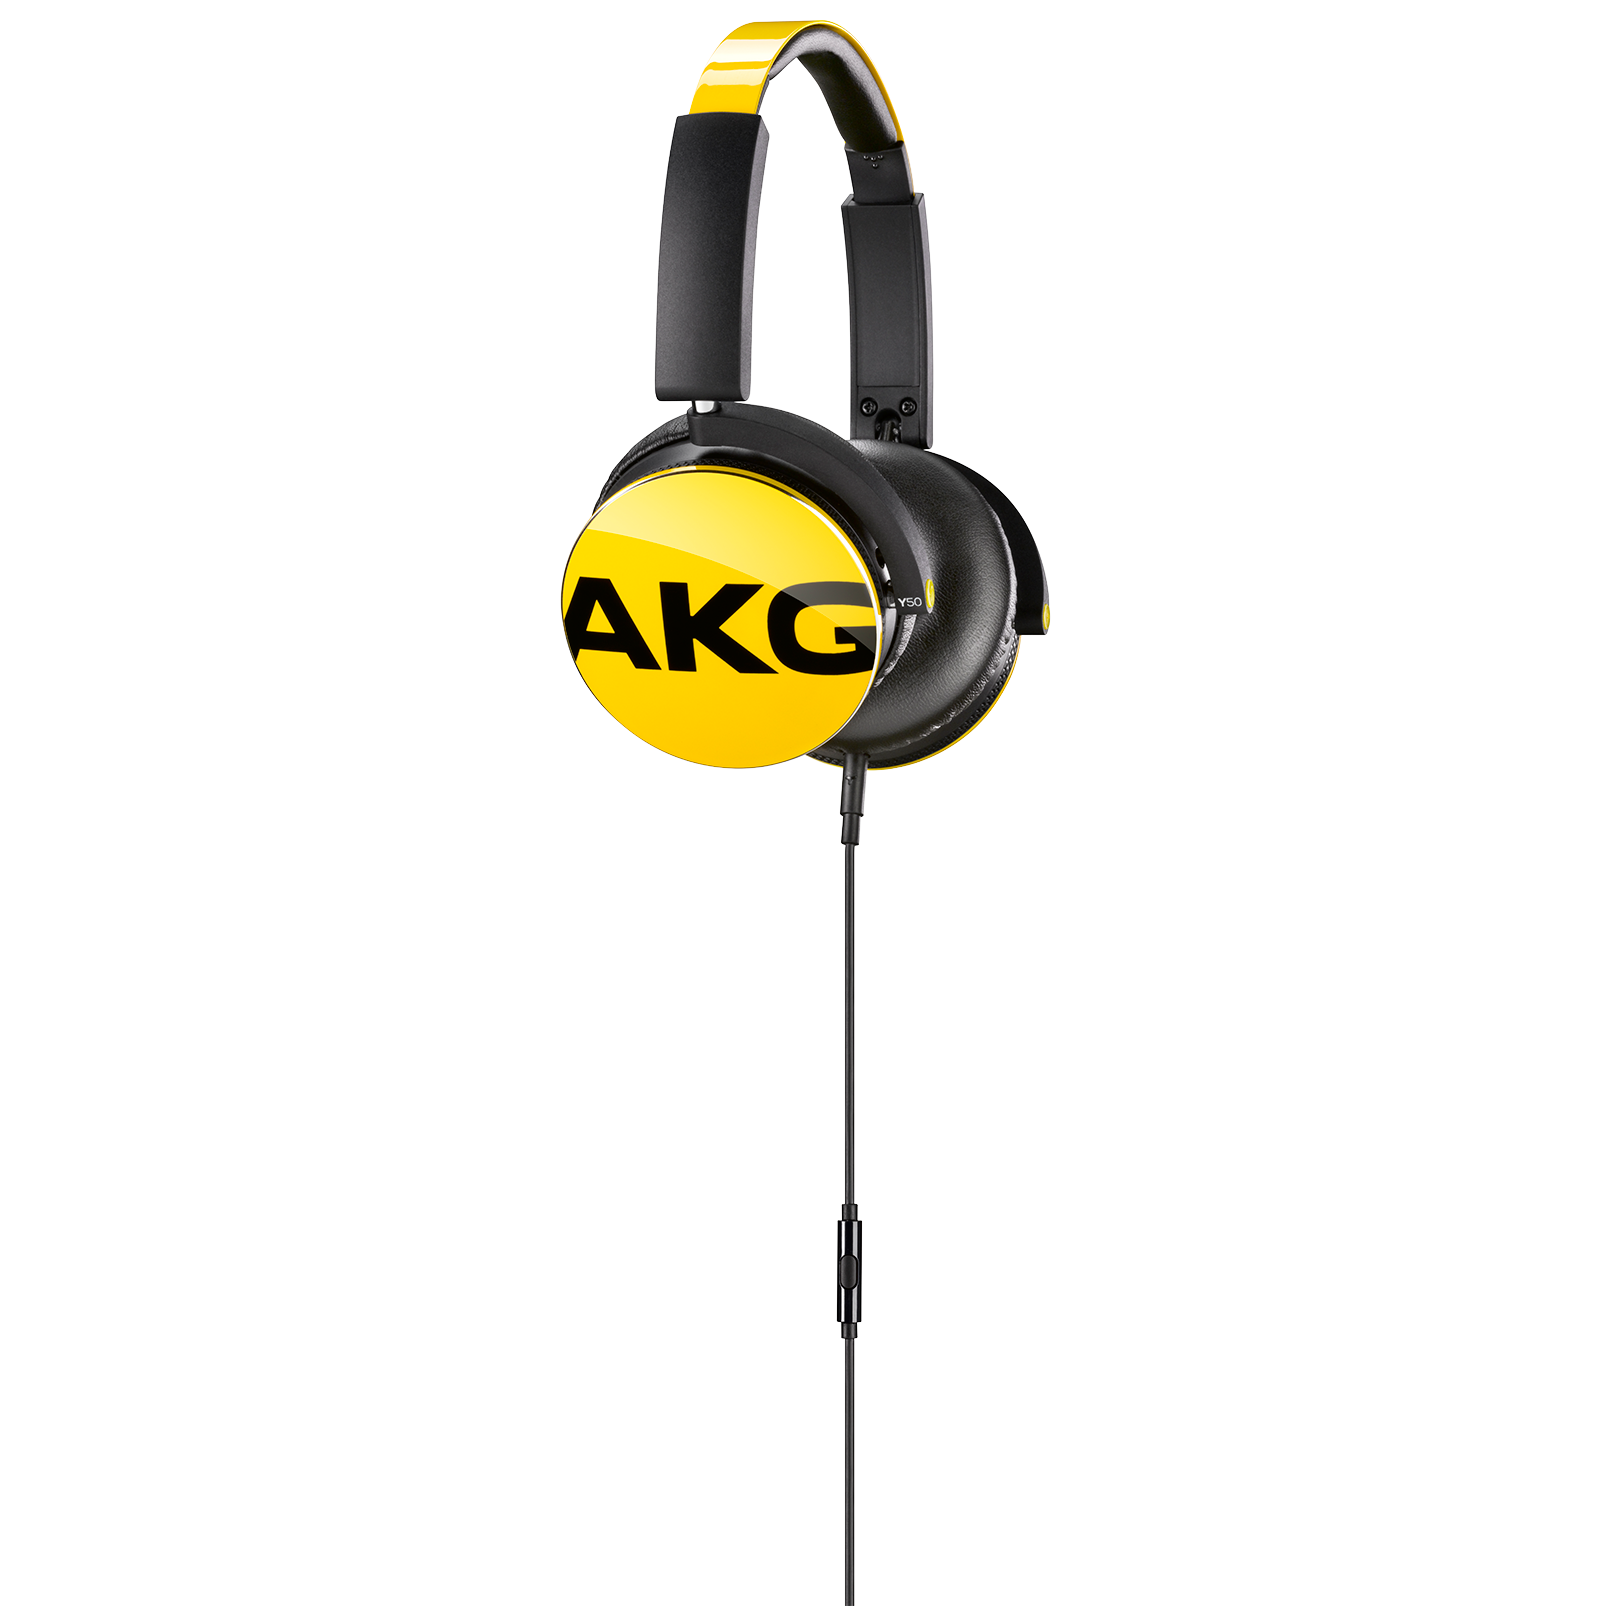 Y50 - Yellow - On-ear headphones with AKG-quality sound, smart styling, snug fit and detachable cable with in-line remote/mic - Detailshot 1